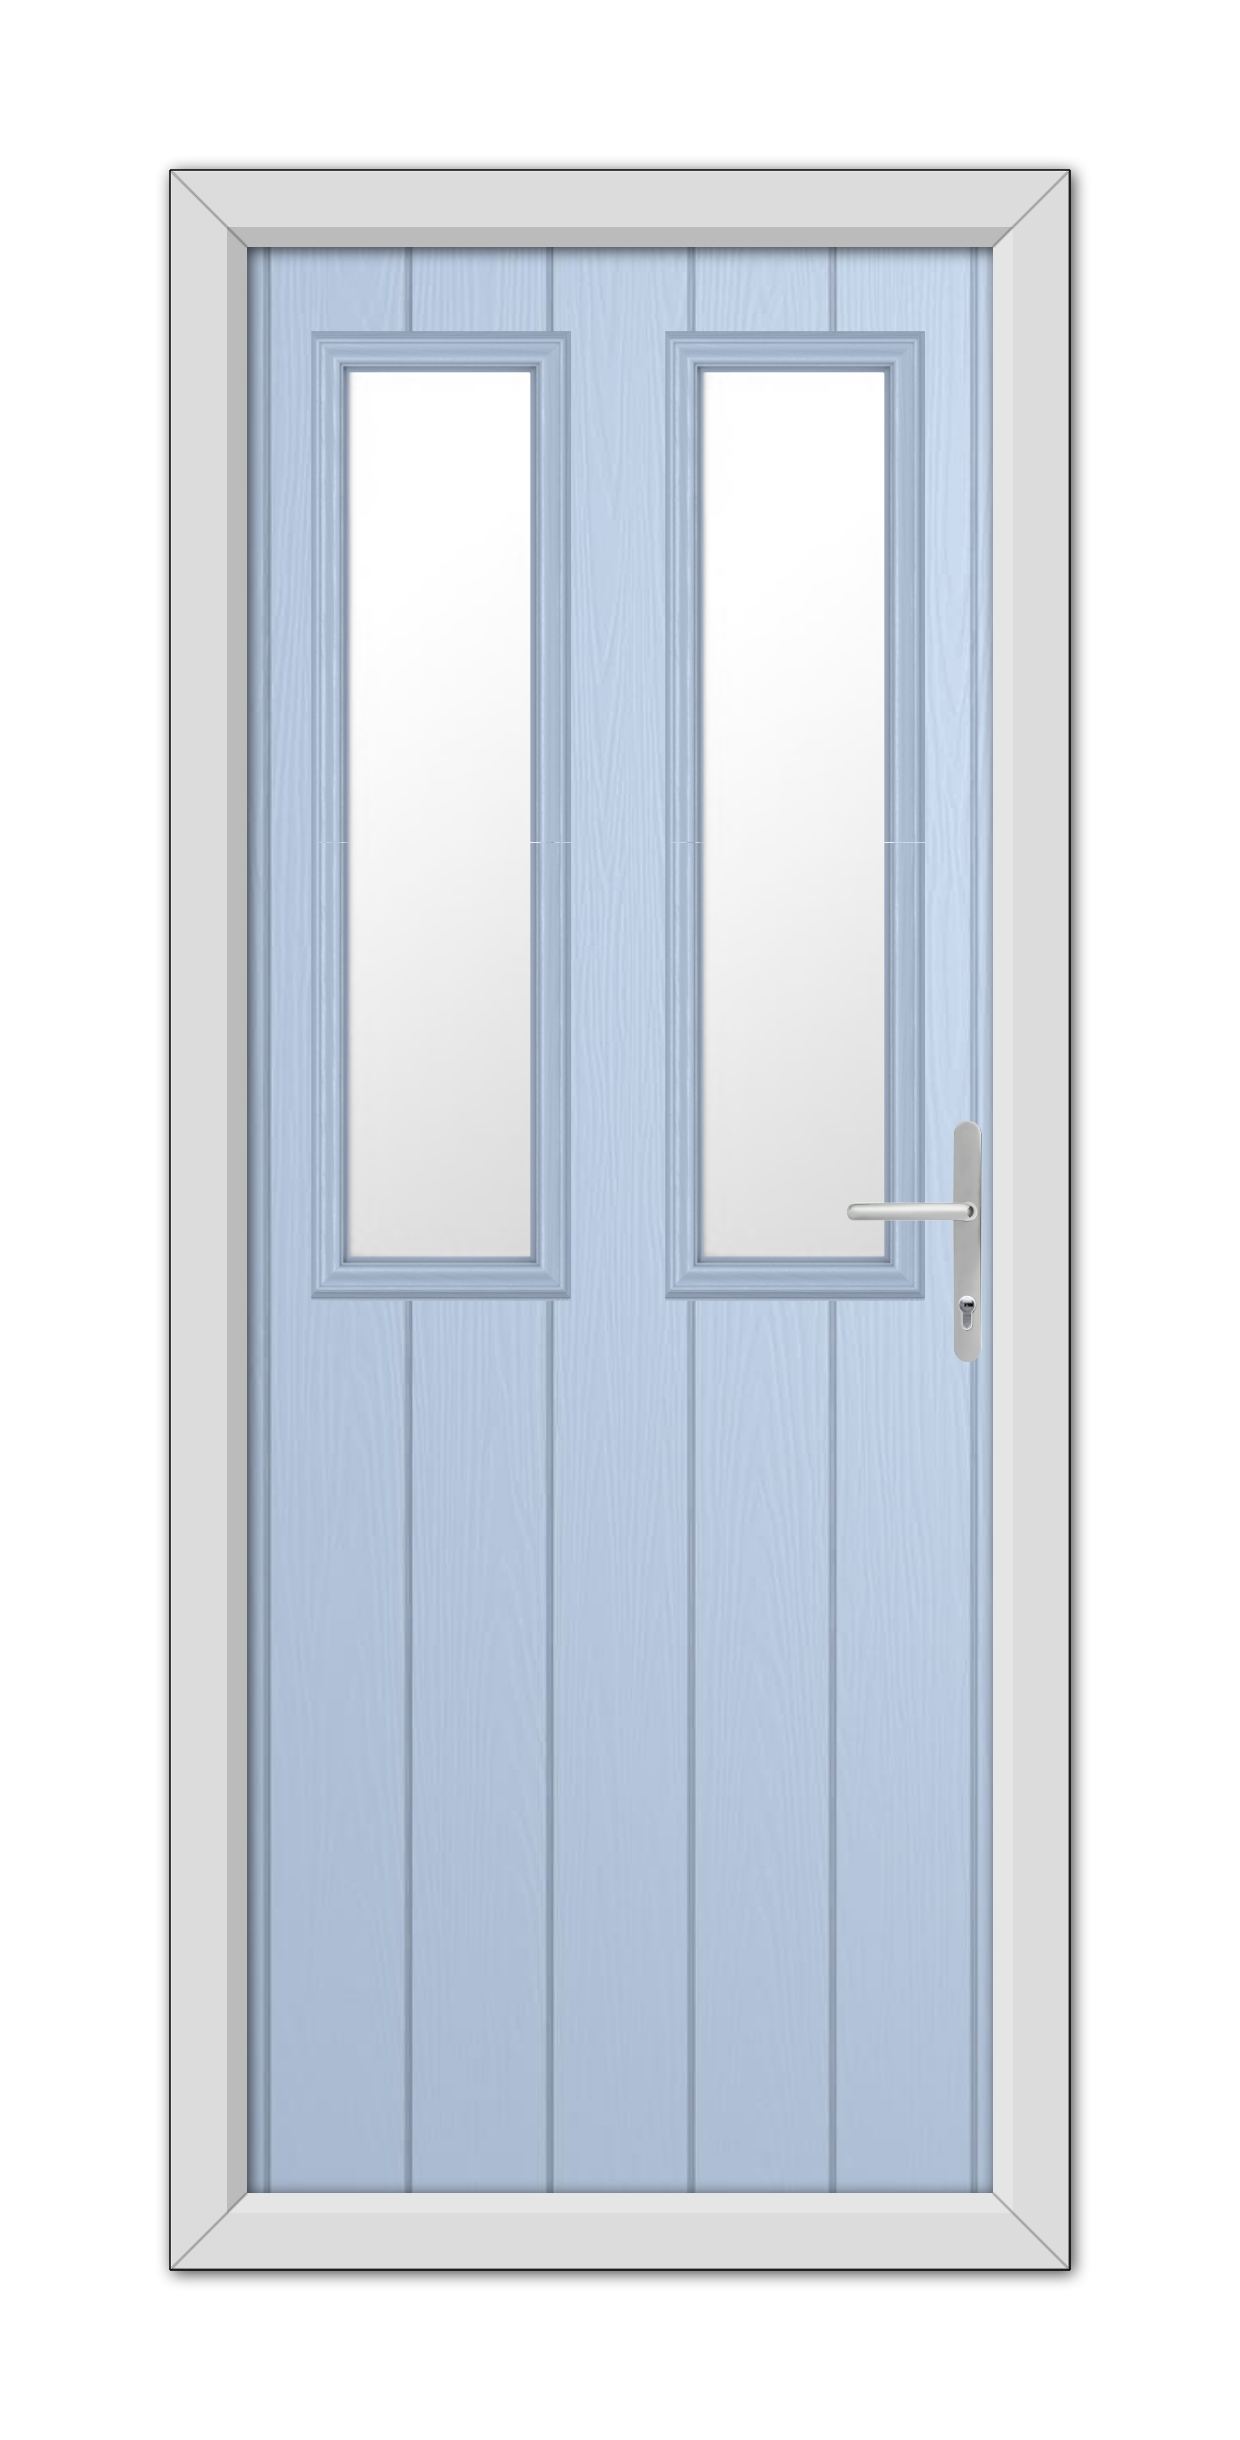 A modern double door with a Duck Egg Blue Wellington Composite Door 48mm Timber Core texture and rectangular glass panels, featuring a silver handle on the right.